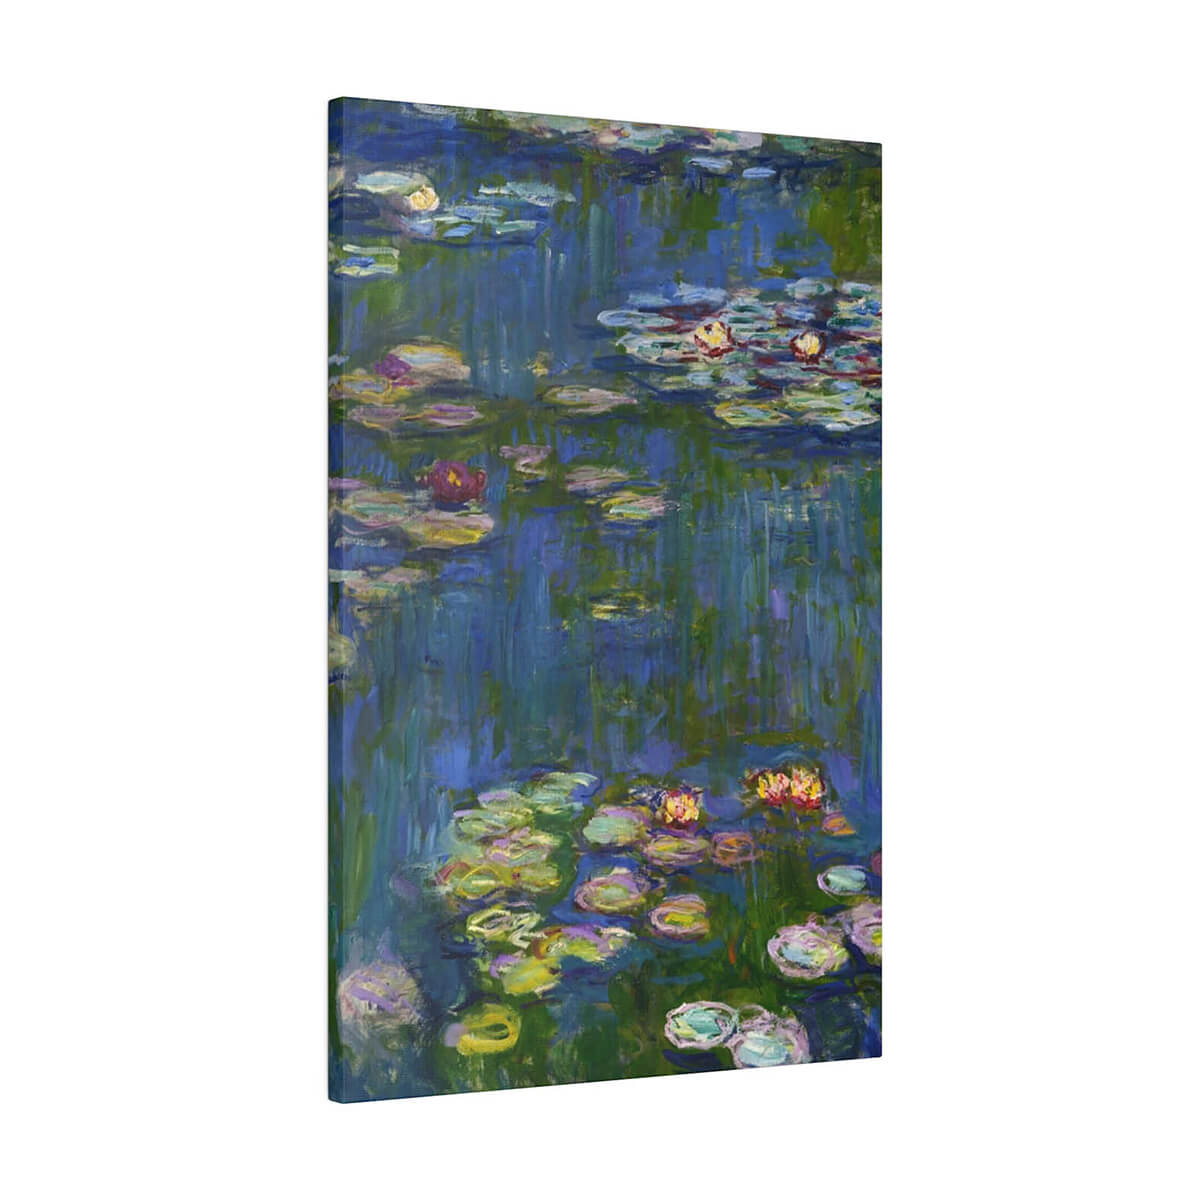 Tranquil scene of water lilies on a pond